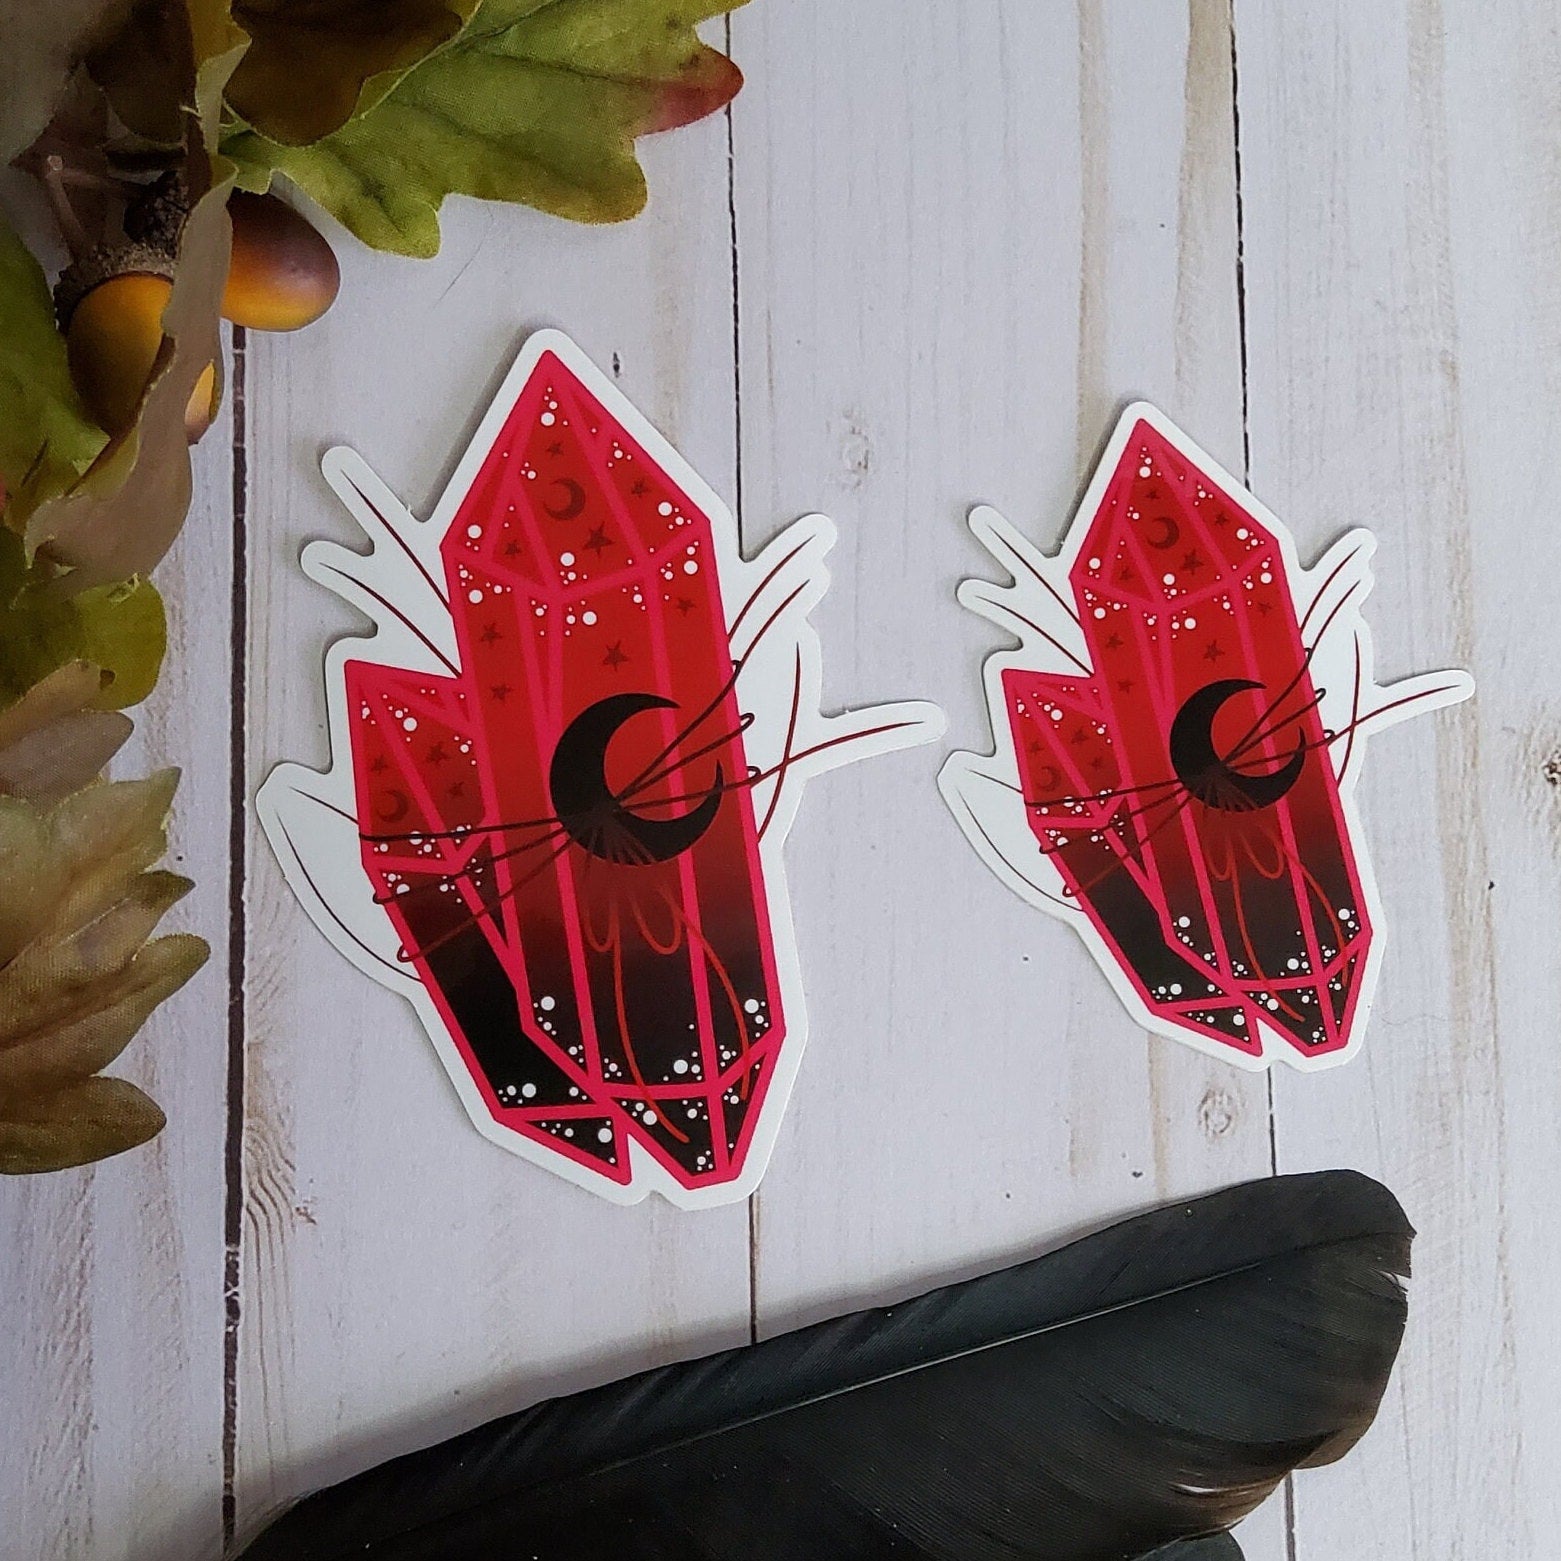 GLOSSY STICKER: Black and Red Moon Crystal , Crystal Sticker , Red and Black Crystal Moon Sticker , Red Crystal Stickers , Black Crystal